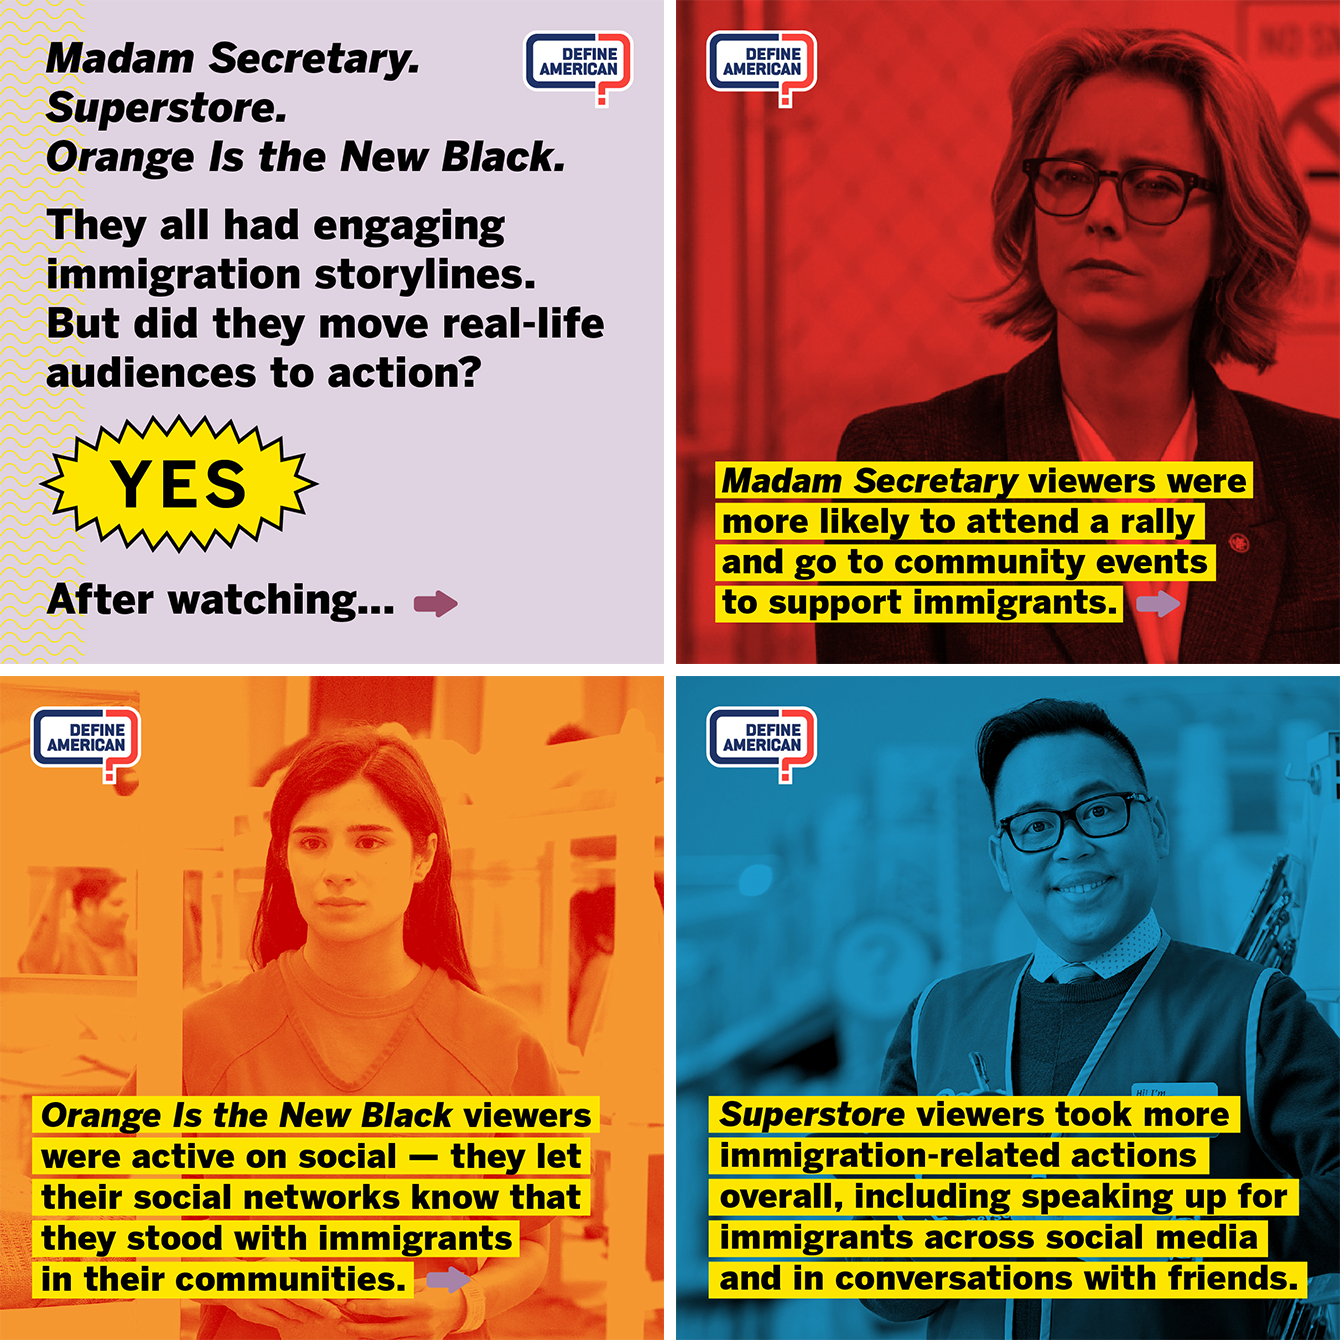 Social graphics showing that viewers of three TV shows who saw the shows' immigration storylines were more likely to take action related to supporting immigrants in real life.